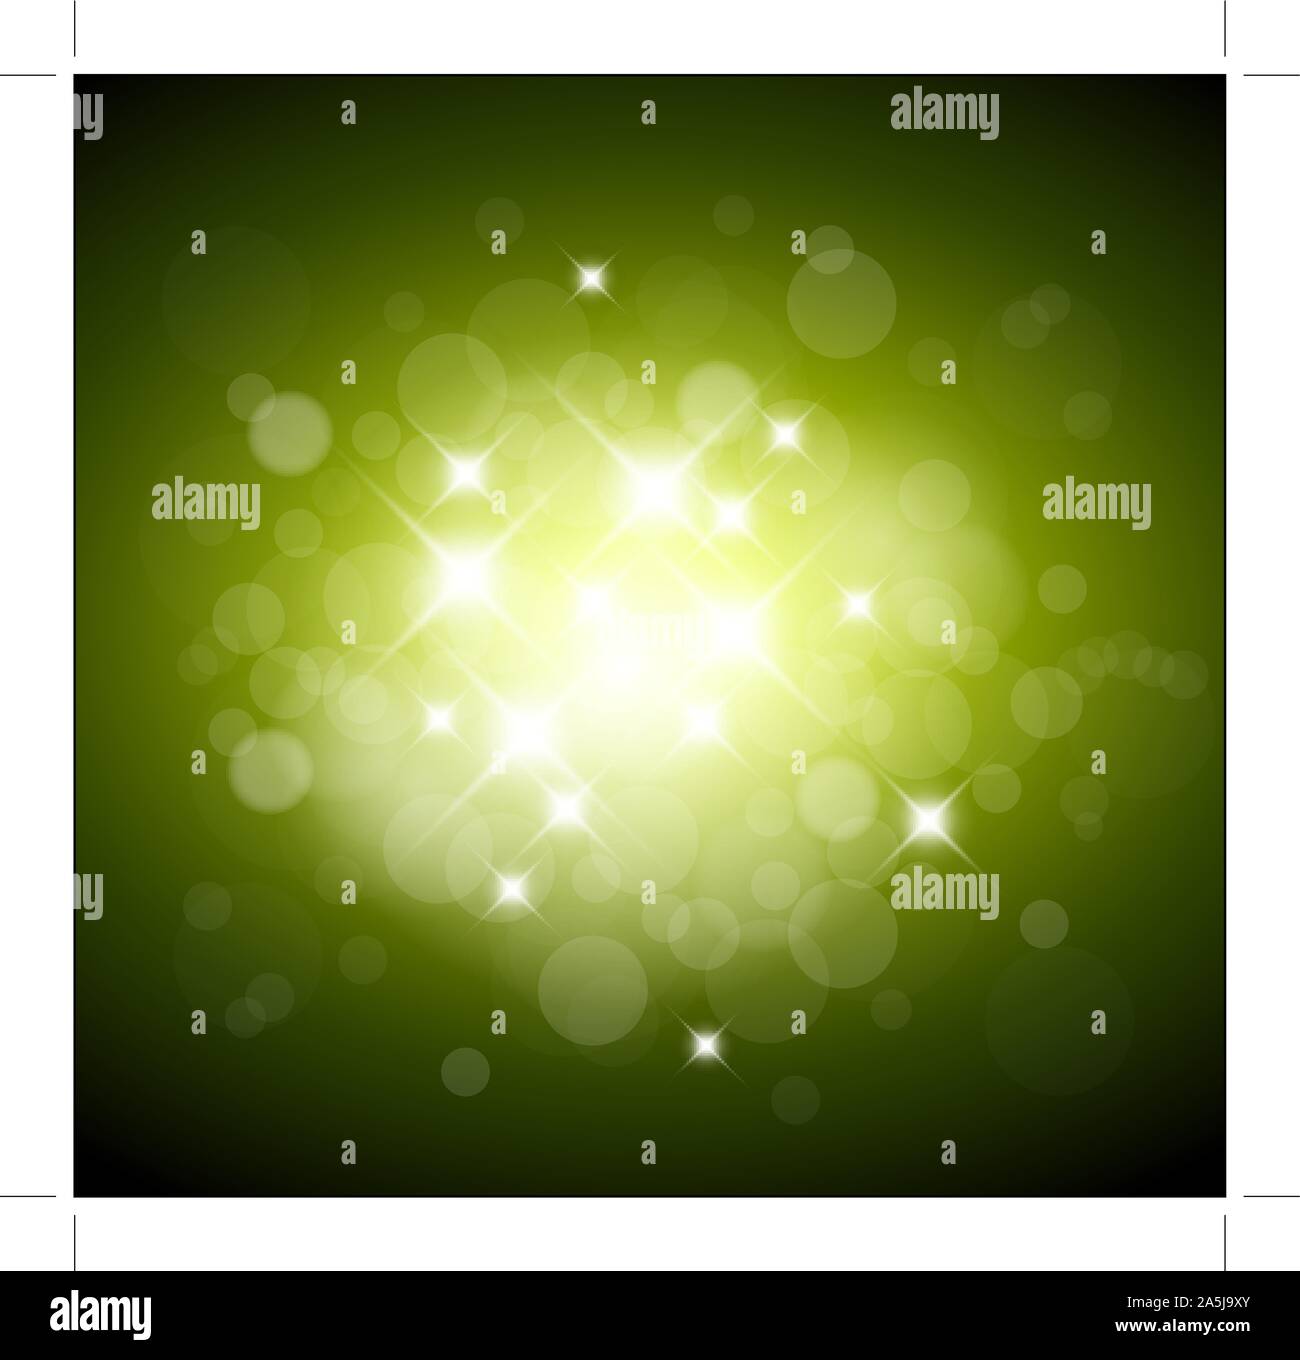 Green background with white lights and place for your text Stock Vector